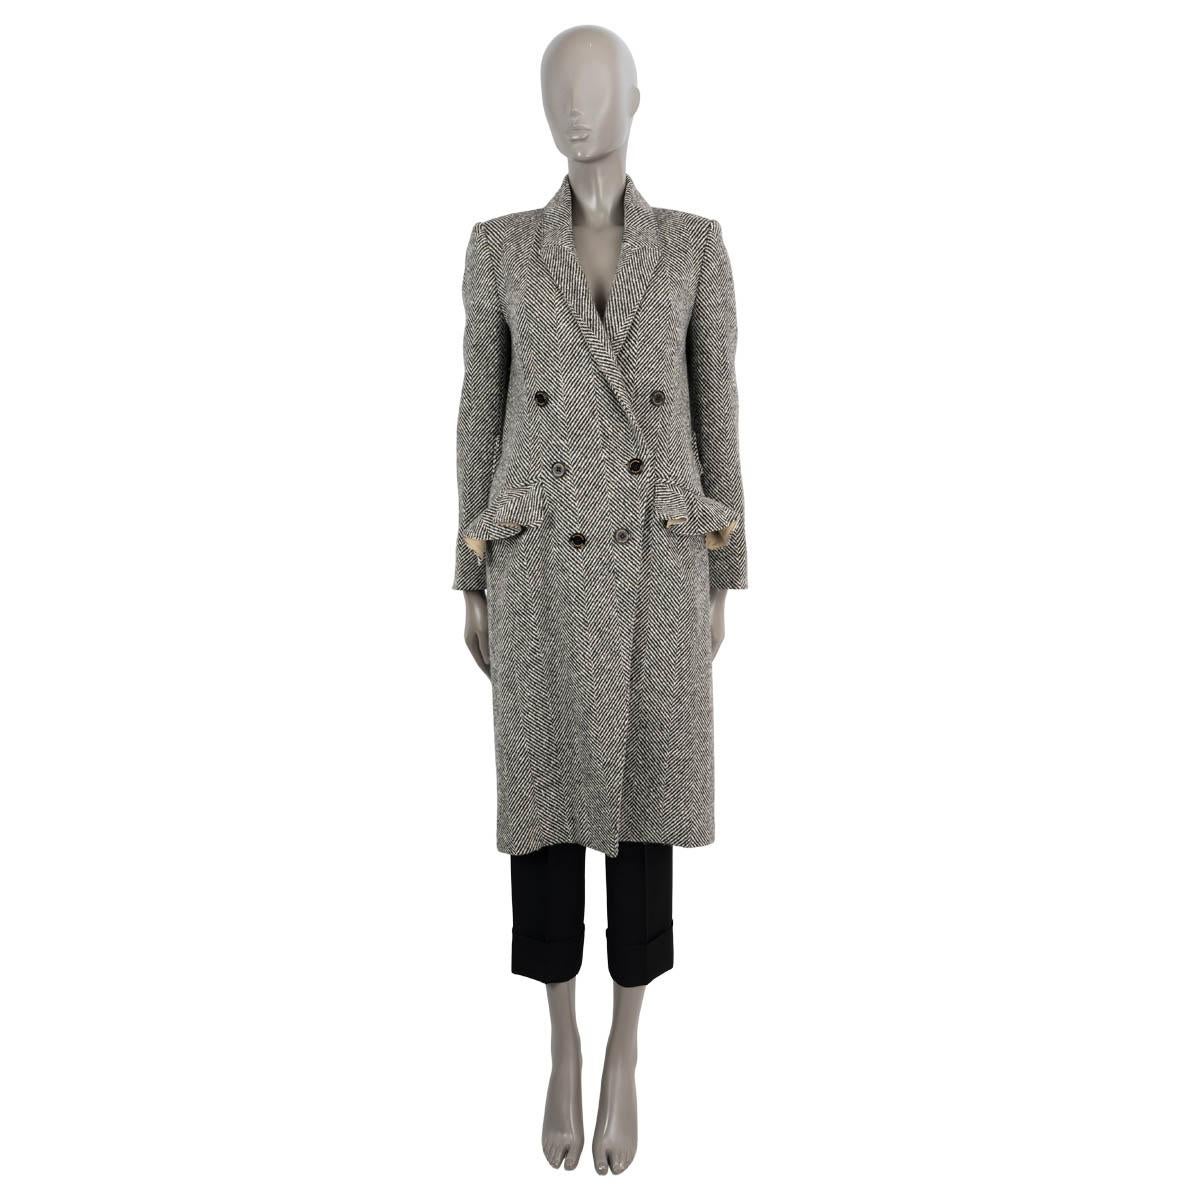 100% authentic Burberry Donegal double-breasted coat in black and white herringbone tweed wool (100%). Features a tailored cut, two ruffled flap pockets, buttoned cuffs and a waist belt in the back. Opens with logo buttons on the front and is lined